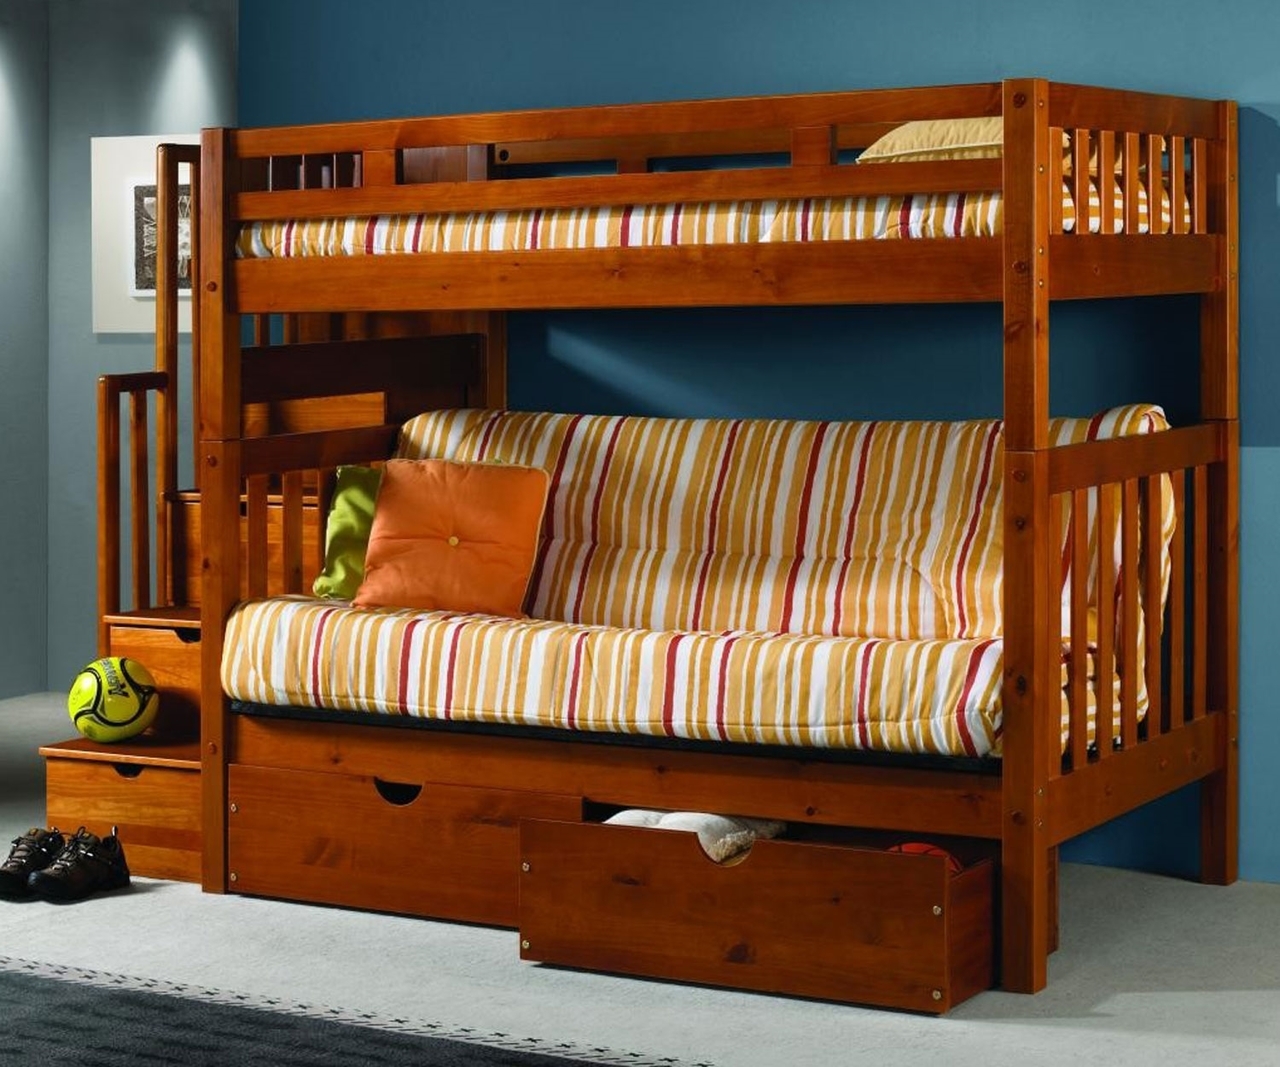 Spotlight On Bunk Beds With Stairs, Kids Bunk Bed With Sofa